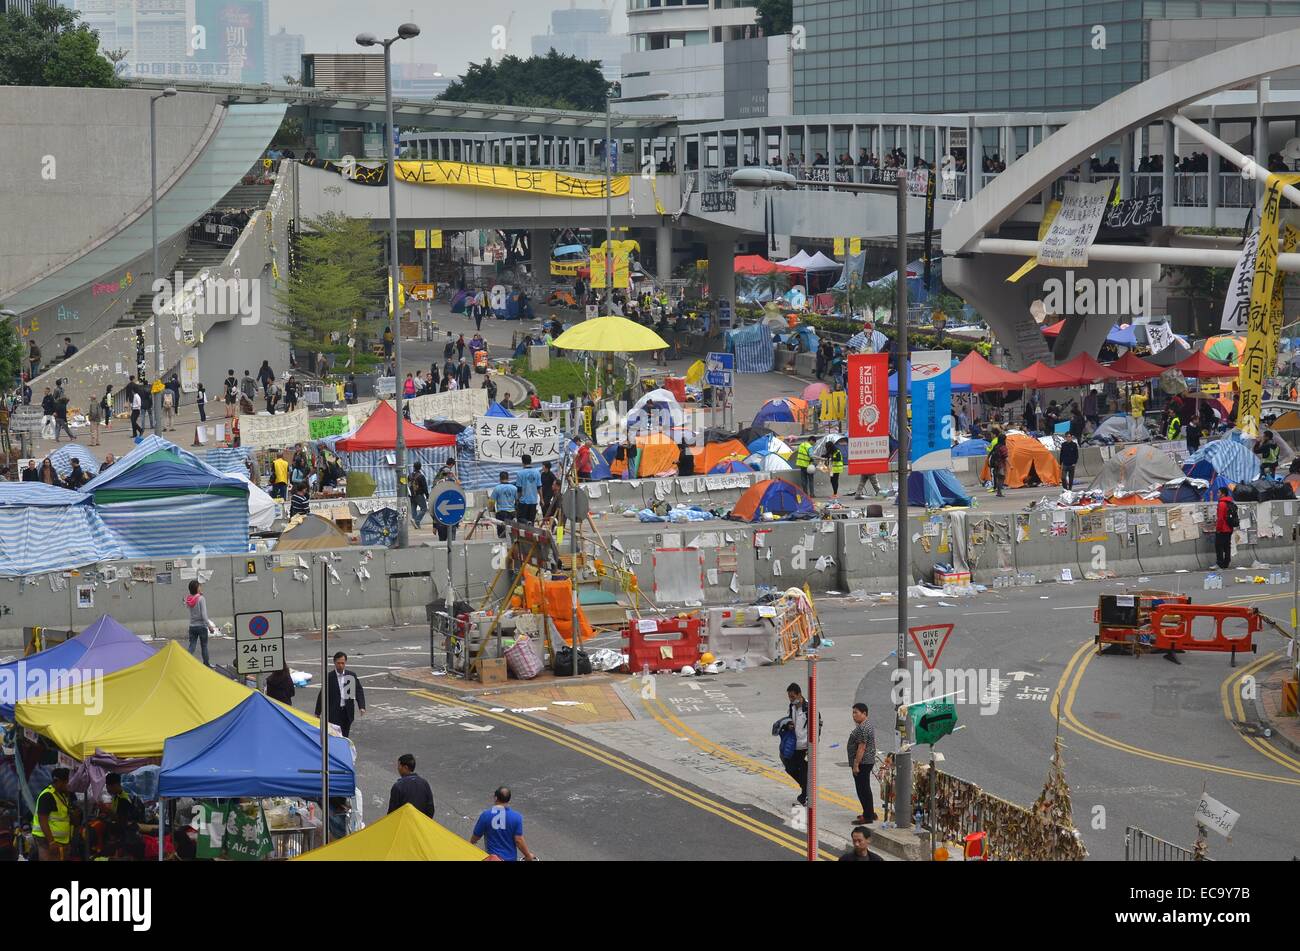 Hong Kong, China. 11th December, 2014. After 74 days of the Occupy Hong Kong protest, visitors make a final trip to the Admiralty site before police enacted a court injunction to remove protesters and their encampment from Connaught Road Central. The authorities had warned protesters to leave in advance of the clearance, but a few pro-democracy demonstrators remained, leading to a handful of arrests. Credit:  Stefan Irvine/Alamy Live News Stock Photo